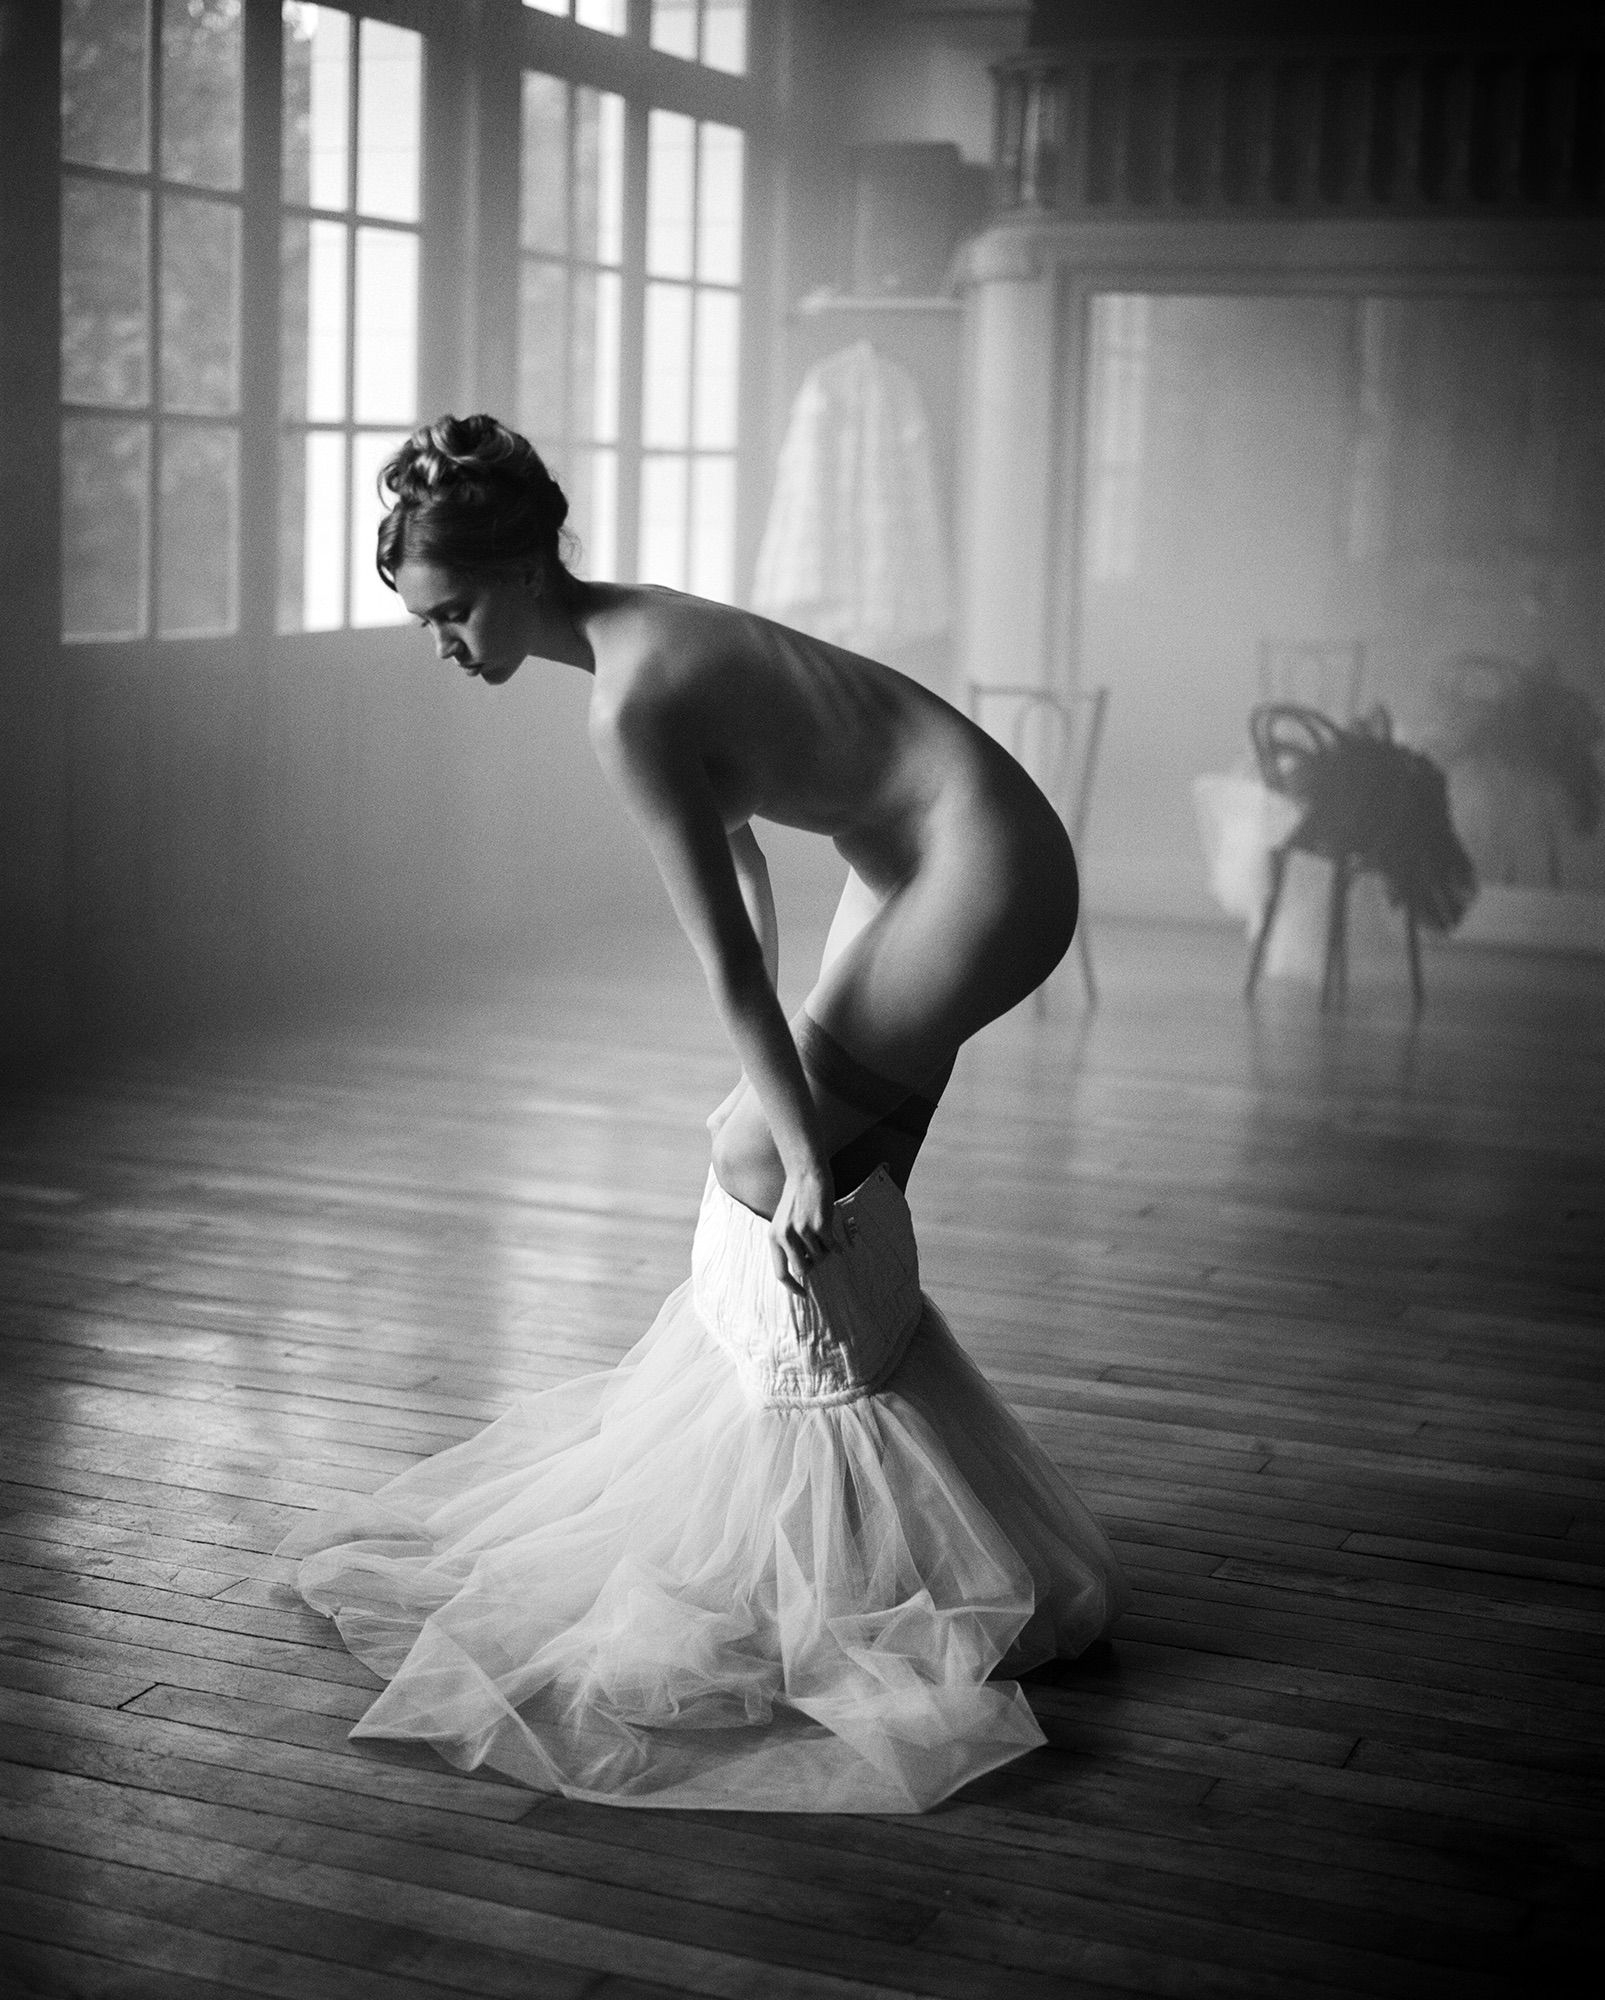 Light Within" by Vincent Peters Loomelinnak